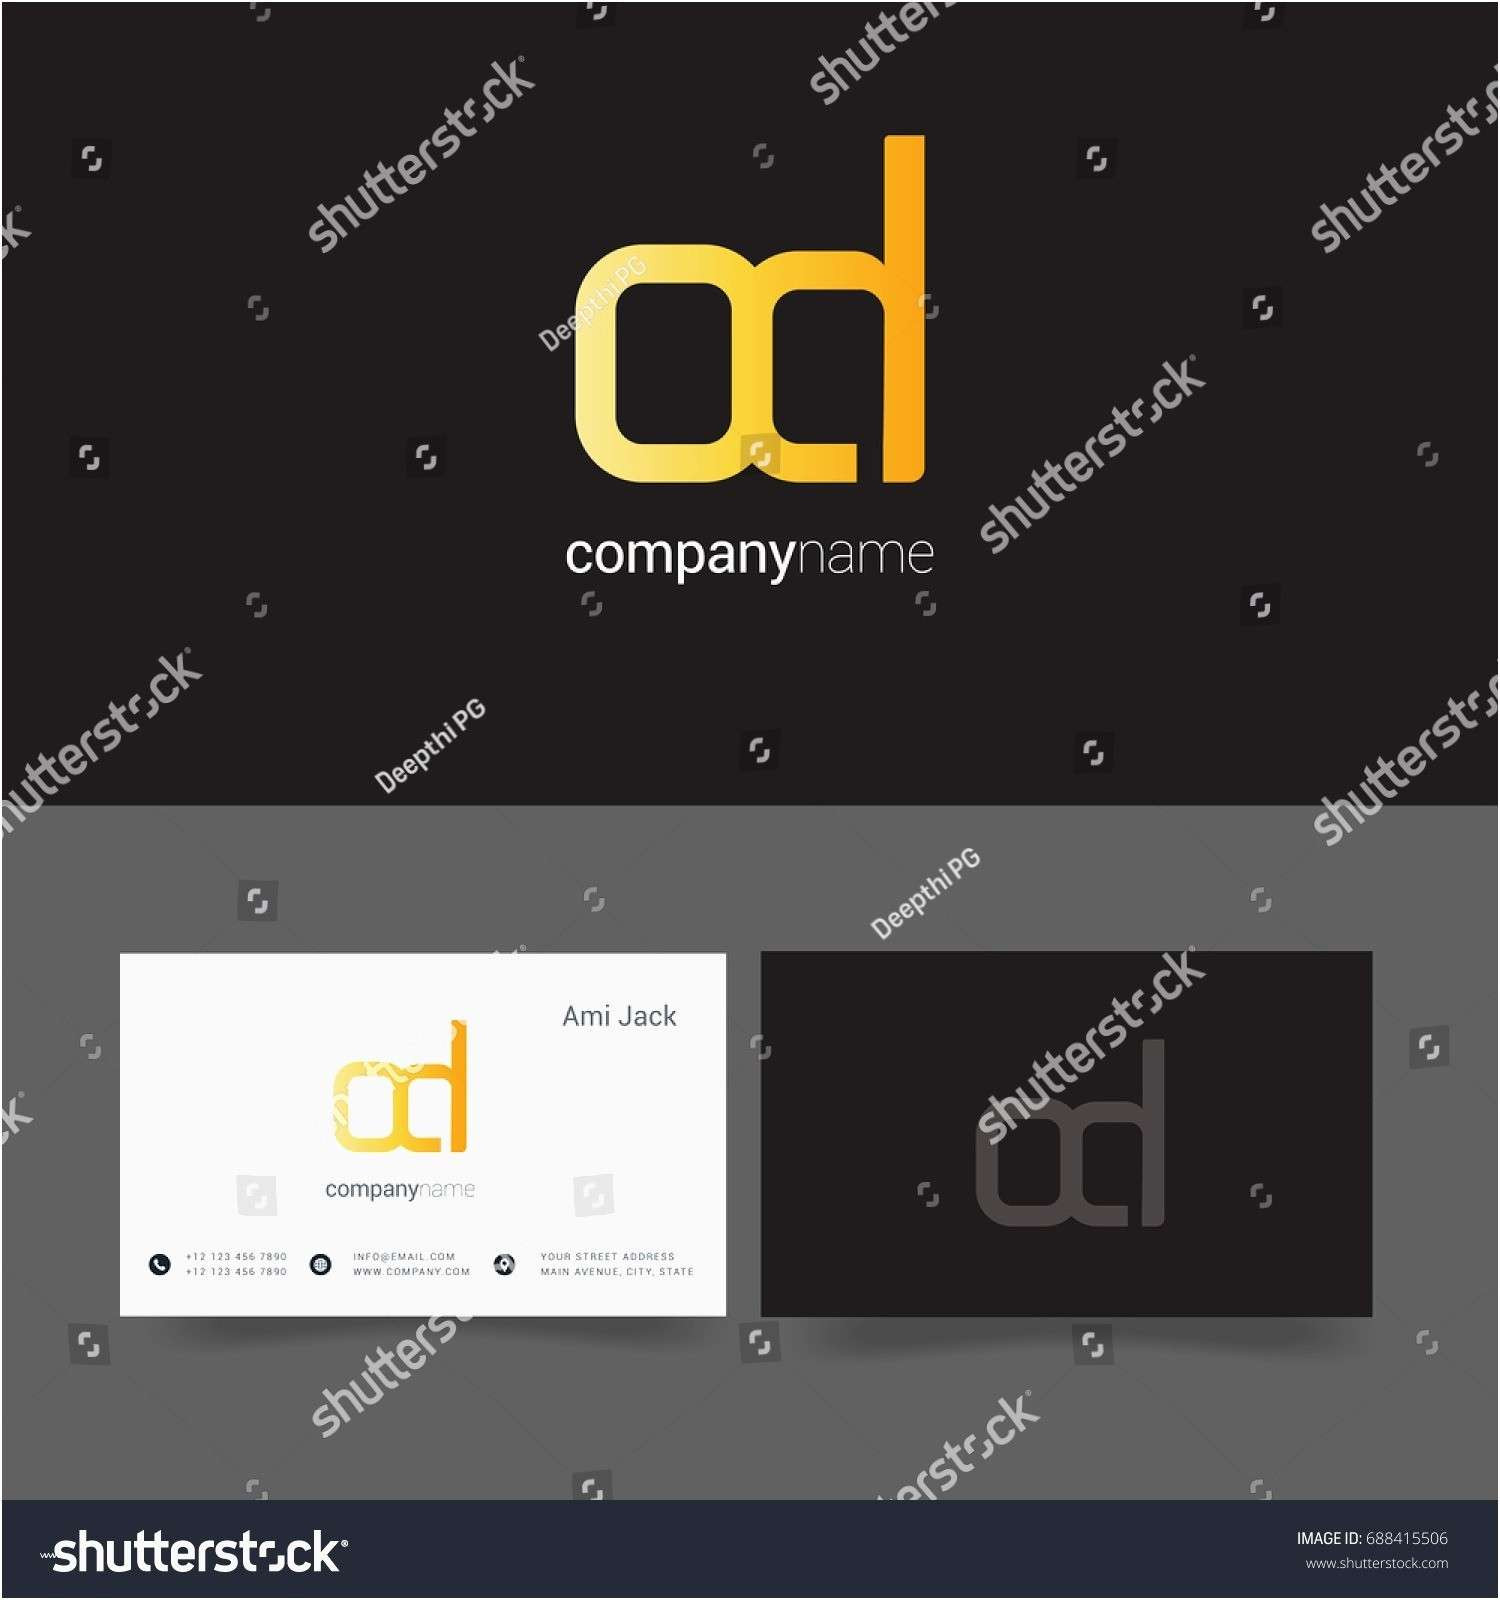 Business Cards Template Free Caquetapositivo Of Awesome Business Cards Templates